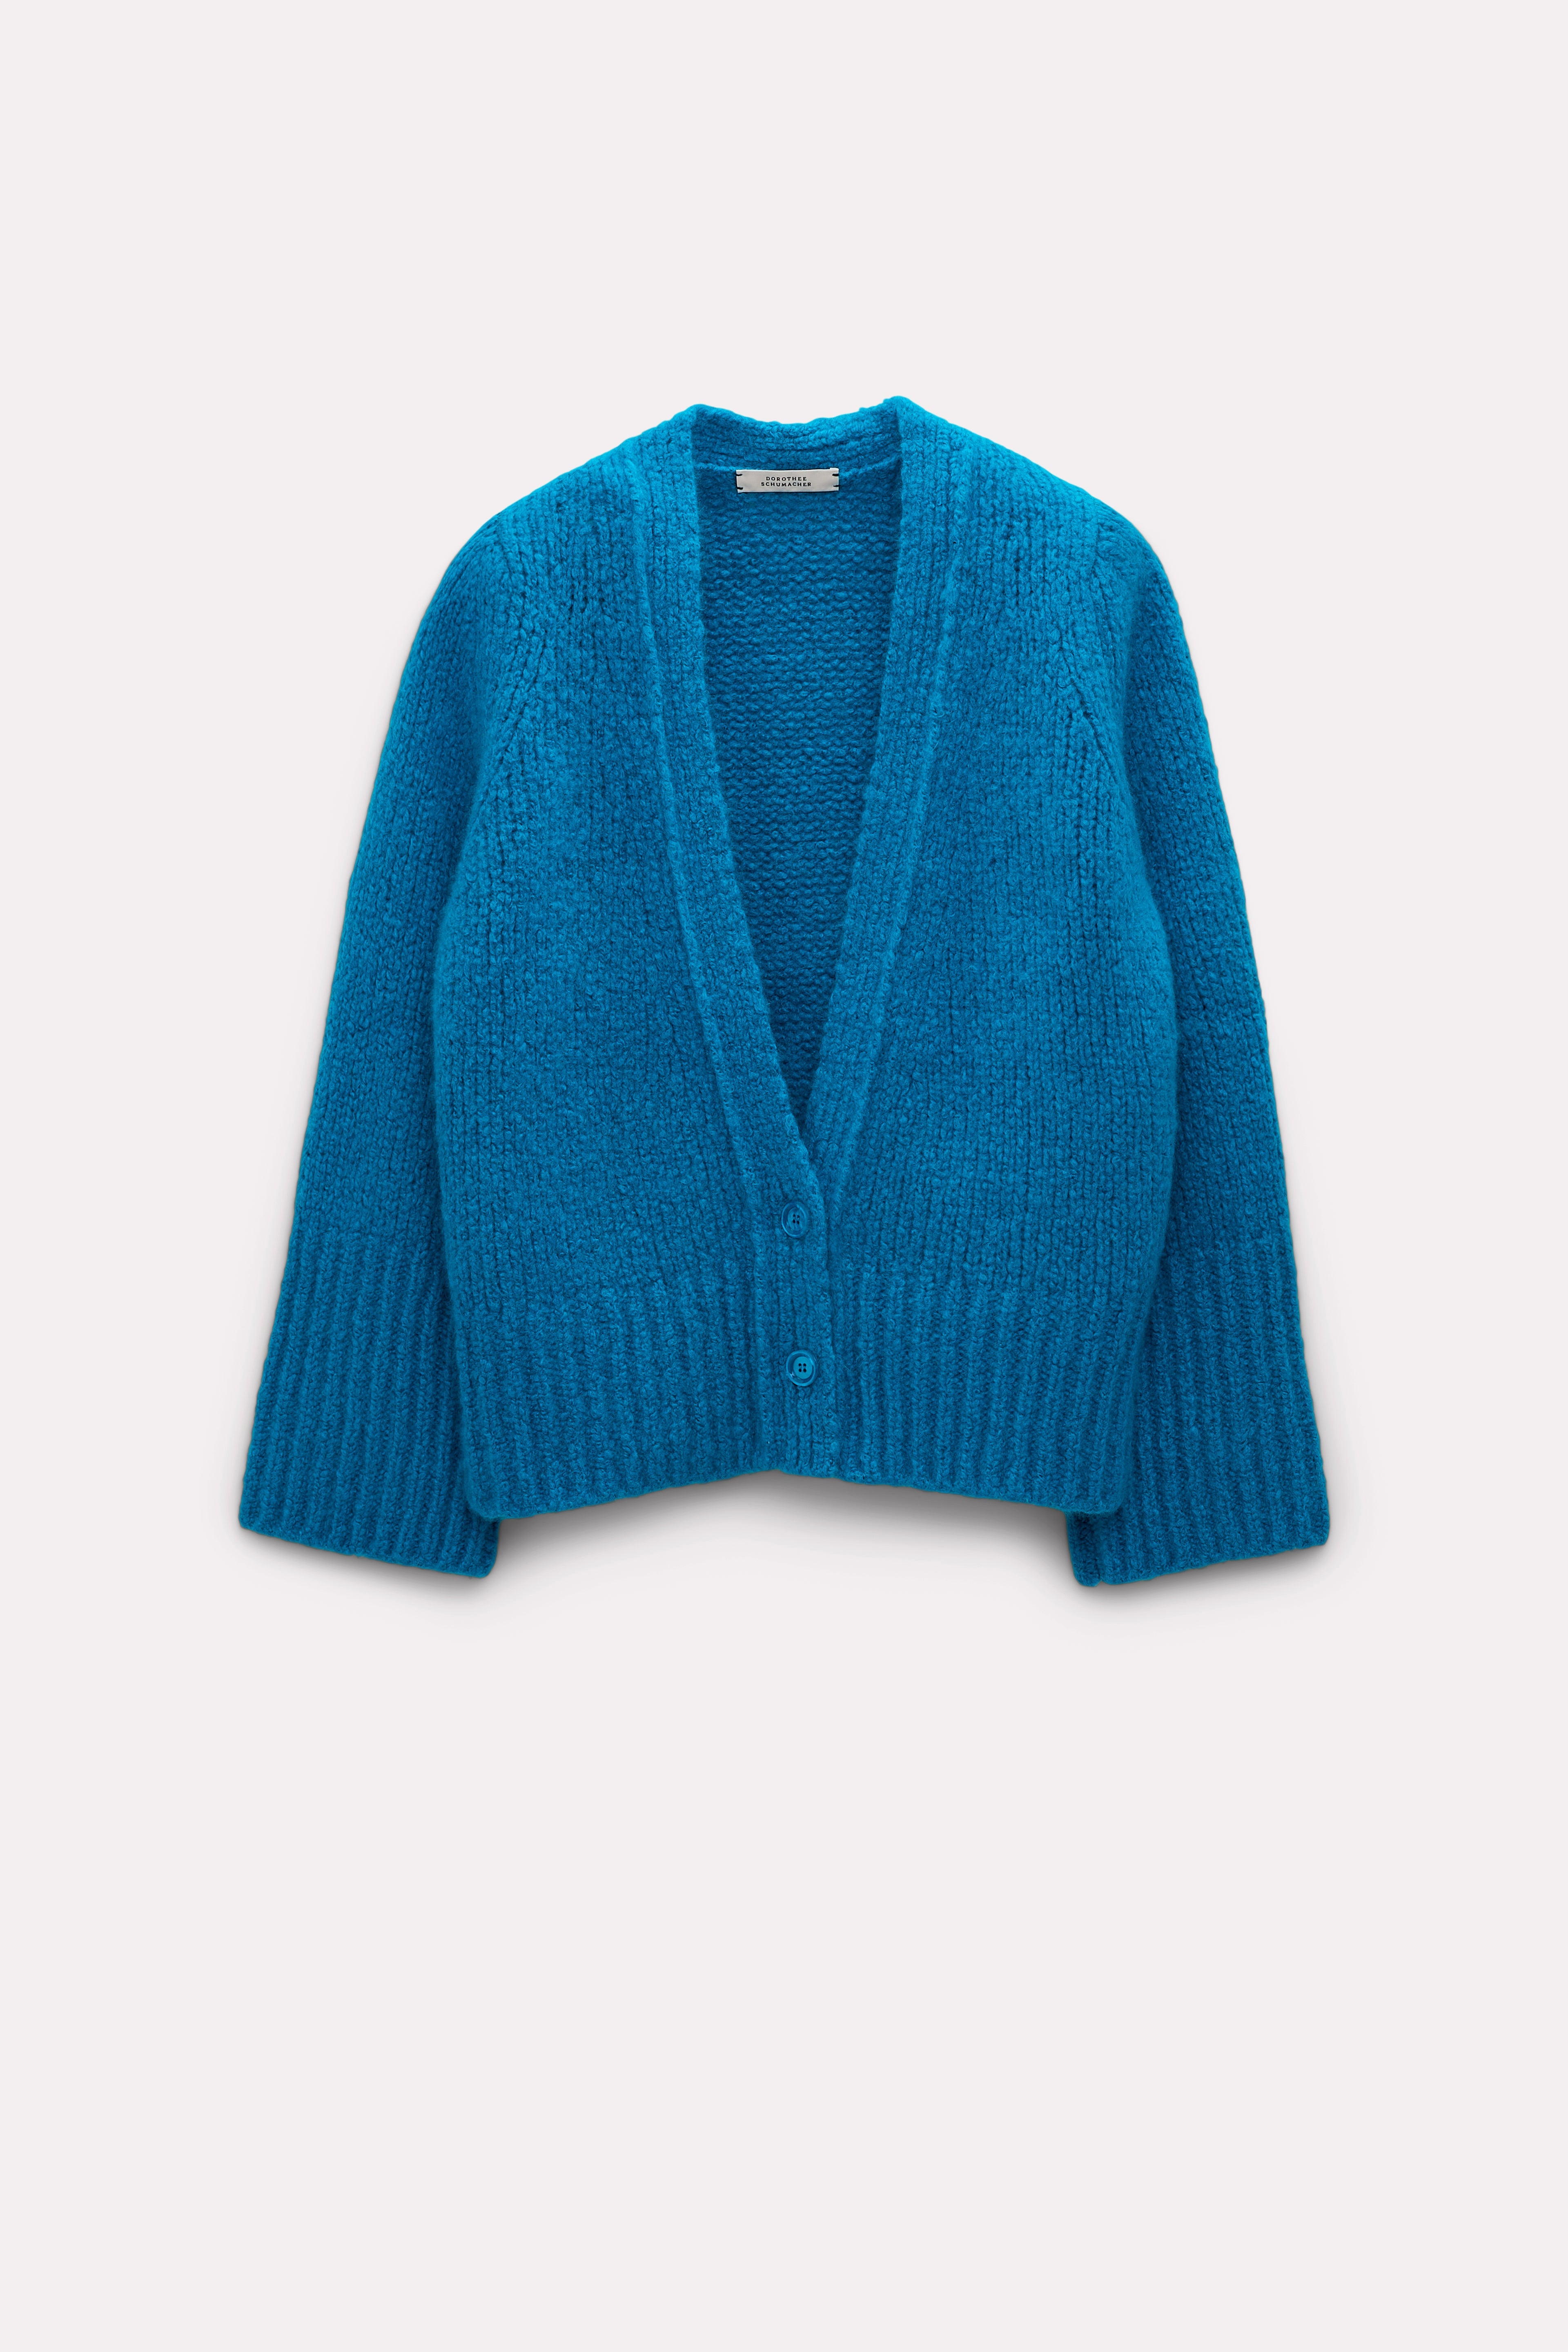 Dorothee-Schumacher-OUTLET-SALE-LUXURY-SOFTNESS-cardigan-Strick-ARCHIVE-COLLECTION_53f2aa5d-01a2-4283-b9b3-6a9f249fd23b.jpg